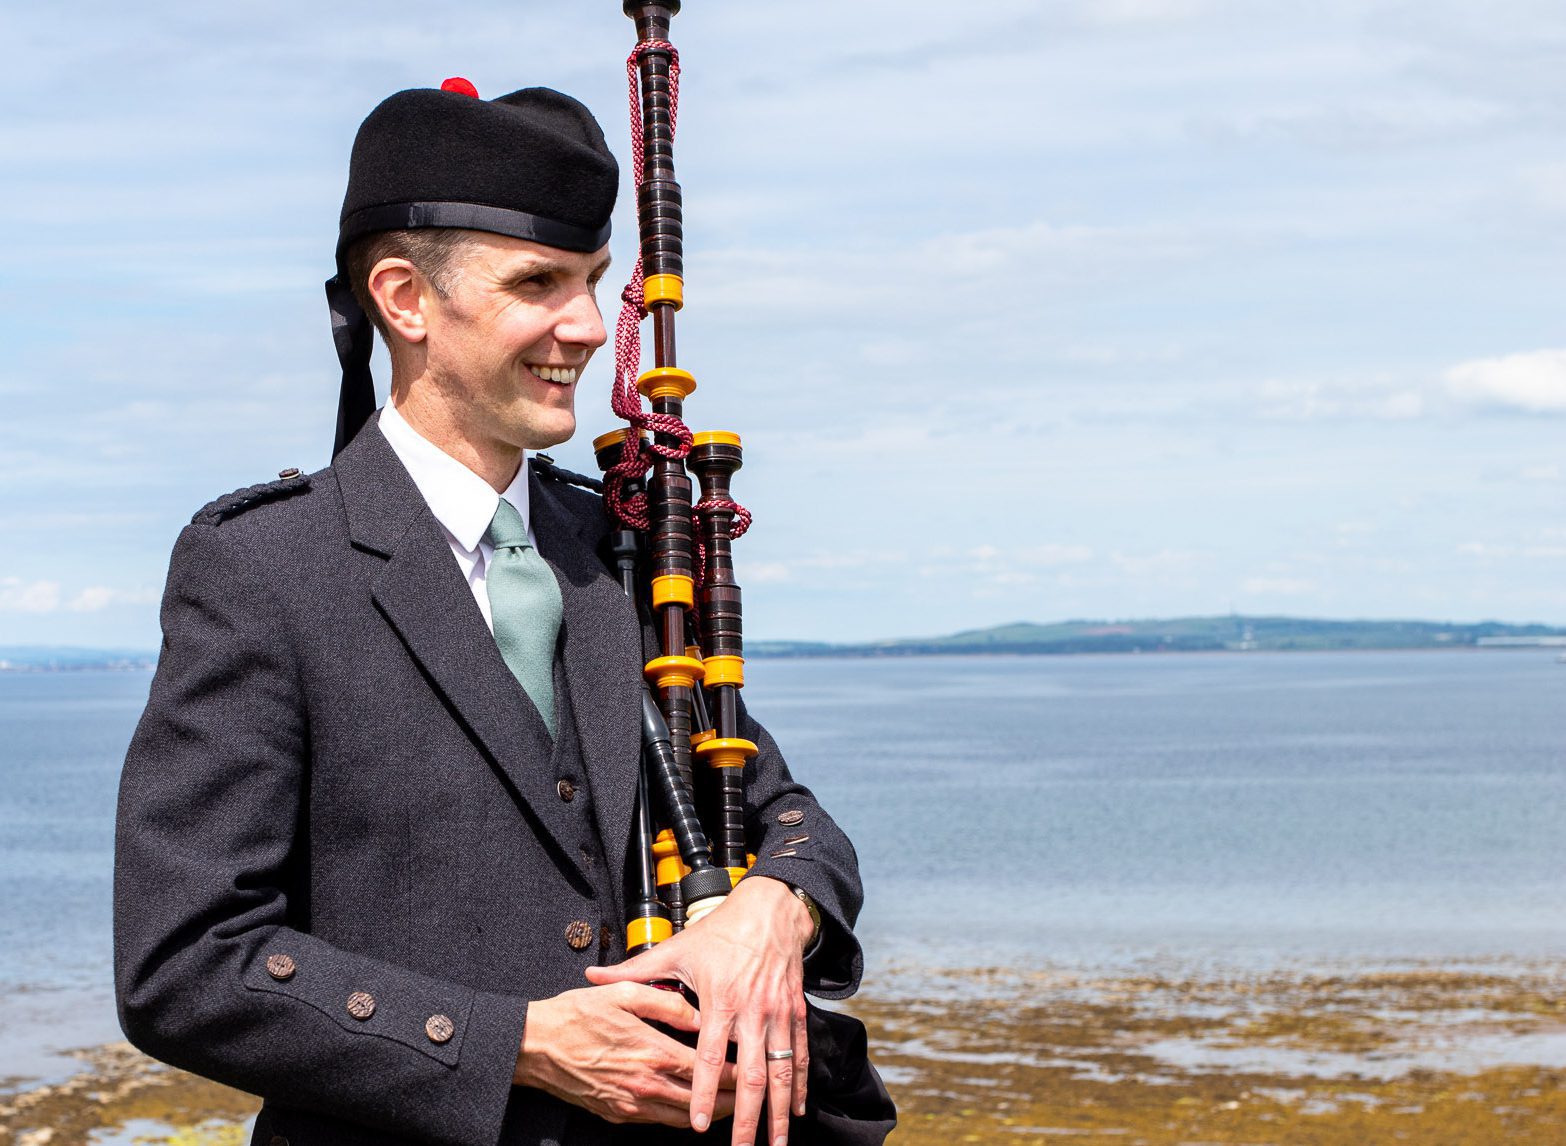 Ayrshire Bagpiper Alistair Brown standing with his bagpipes and wearing lamont kilt at Greenan Shore in Ayr, Scotland